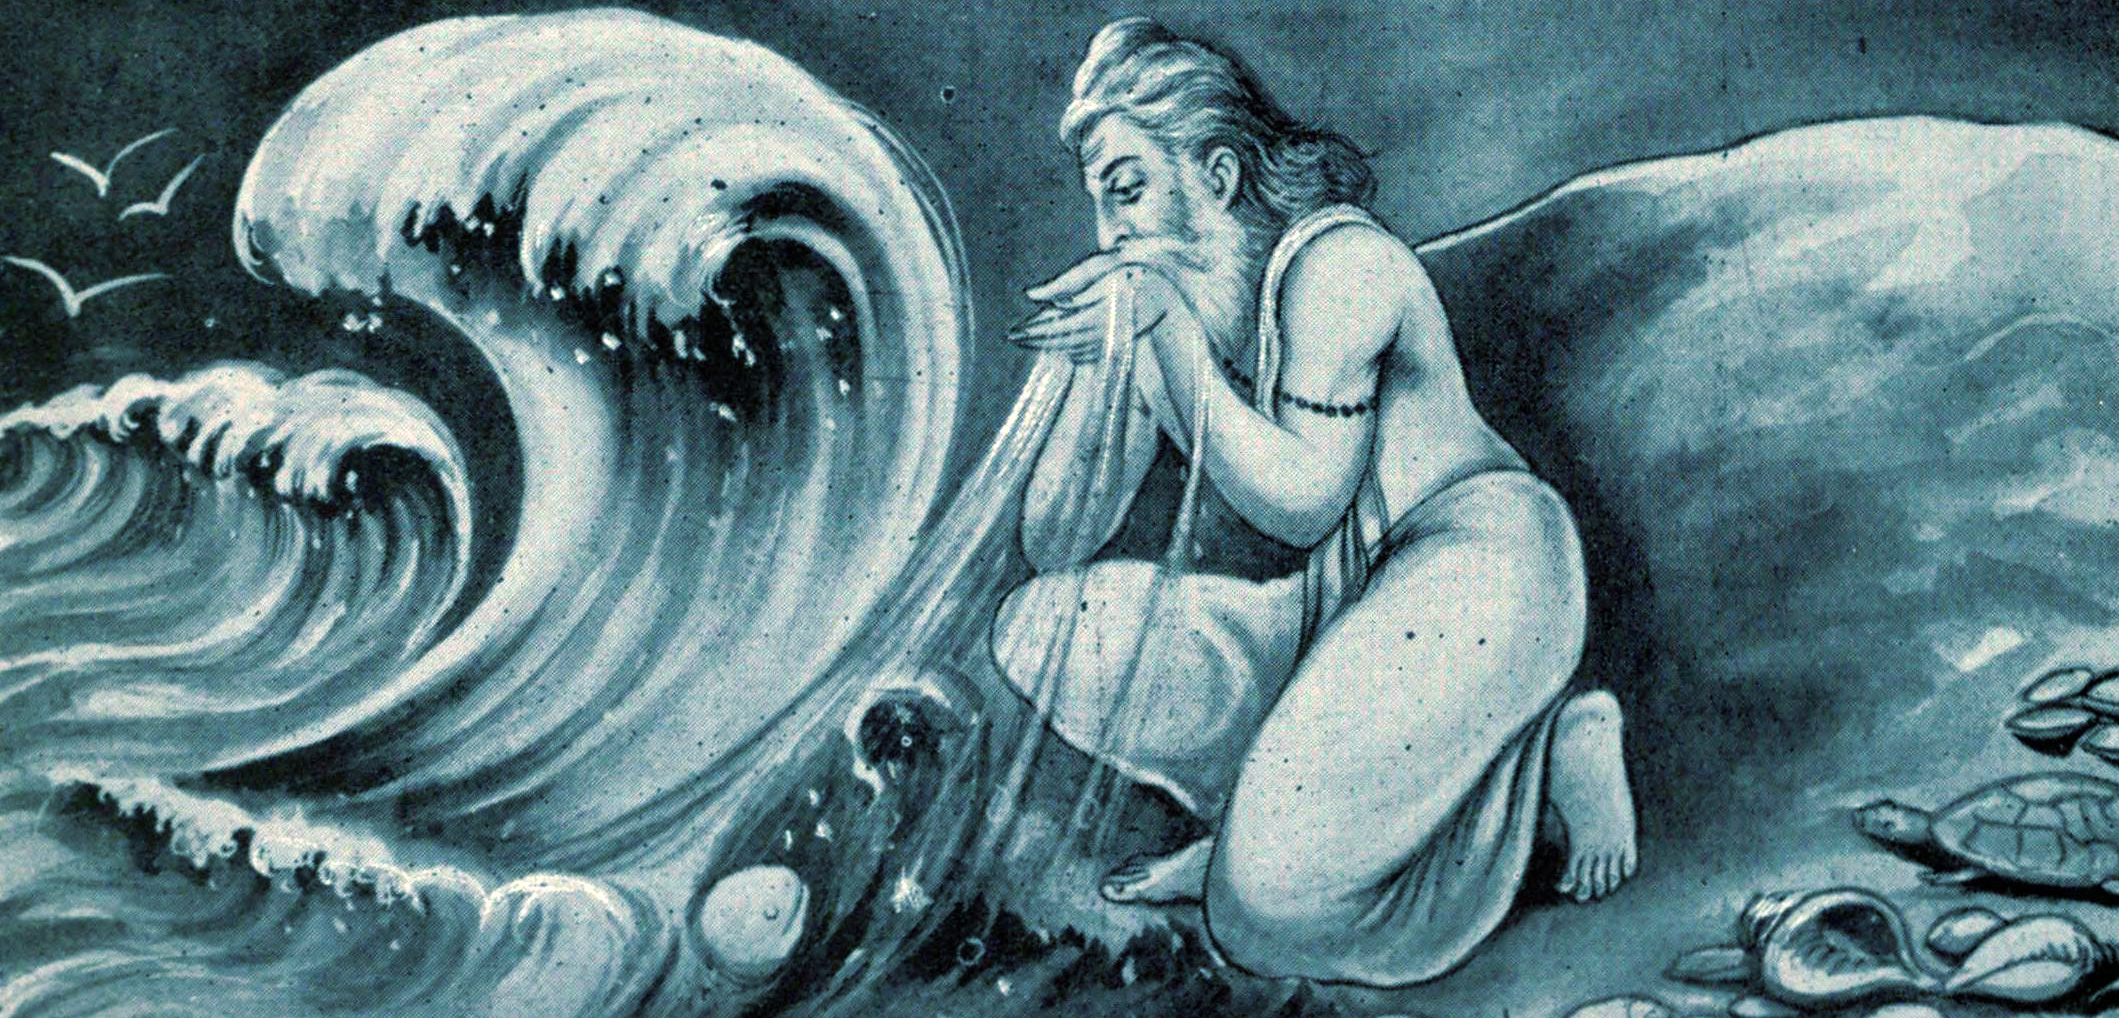 In Hindu mythology, the powerful sage Agastya slurps up the sea and then spews or urinates it out, making it salty.